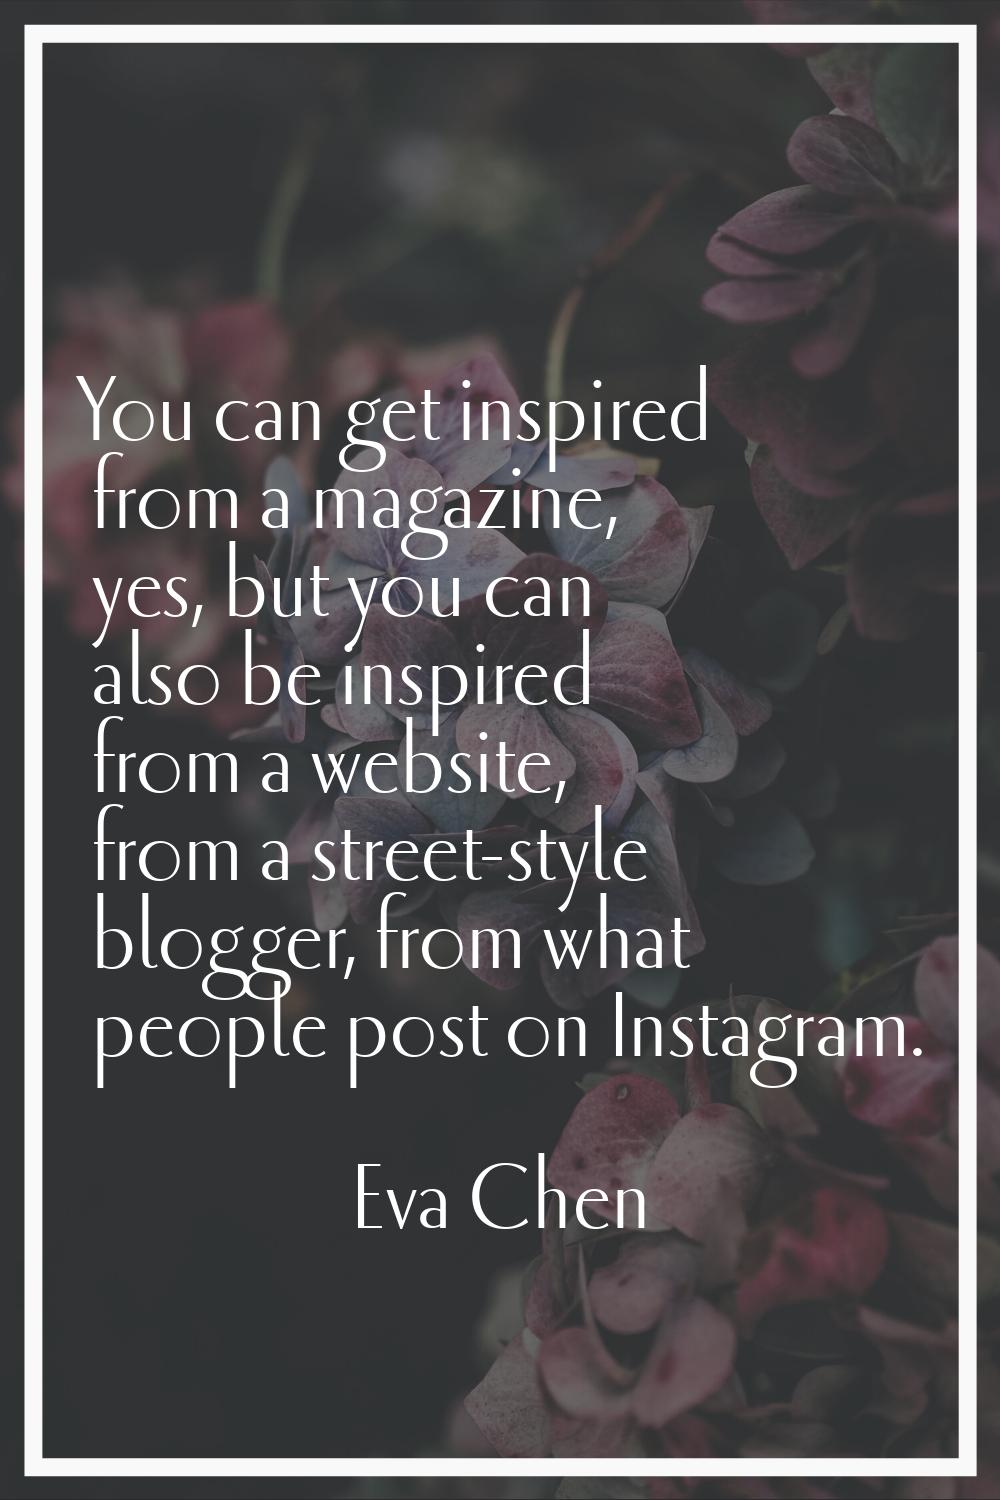 You can get inspired from a magazine, yes, but you can also be inspired from a website, from a stre